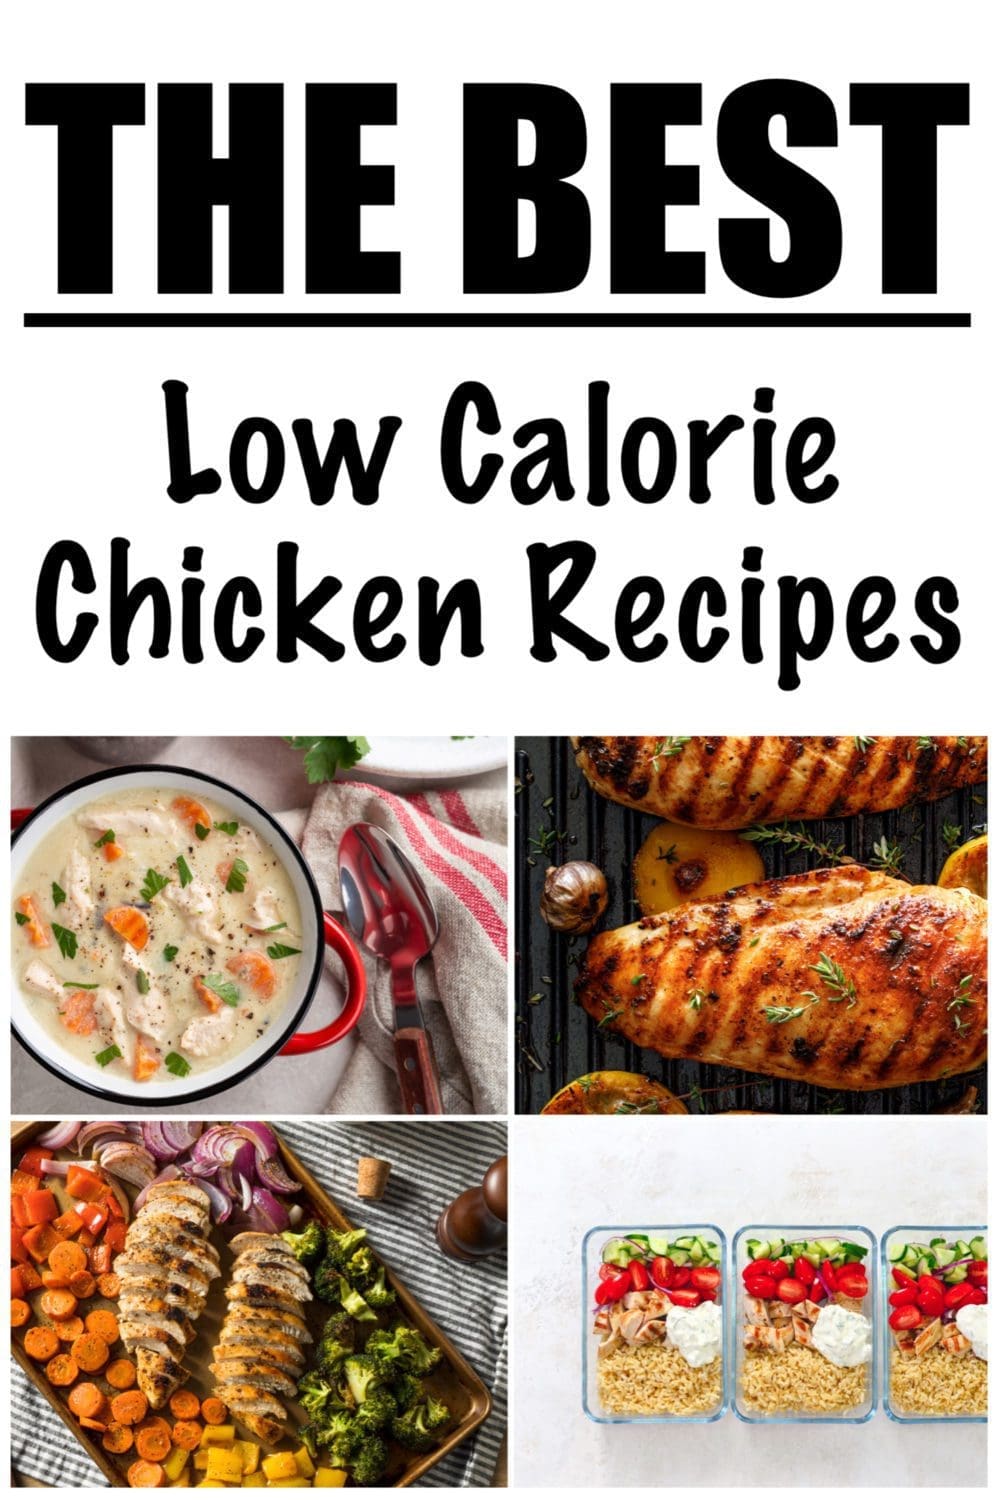 Low Calorie Chicken Recipes for Weight Loss